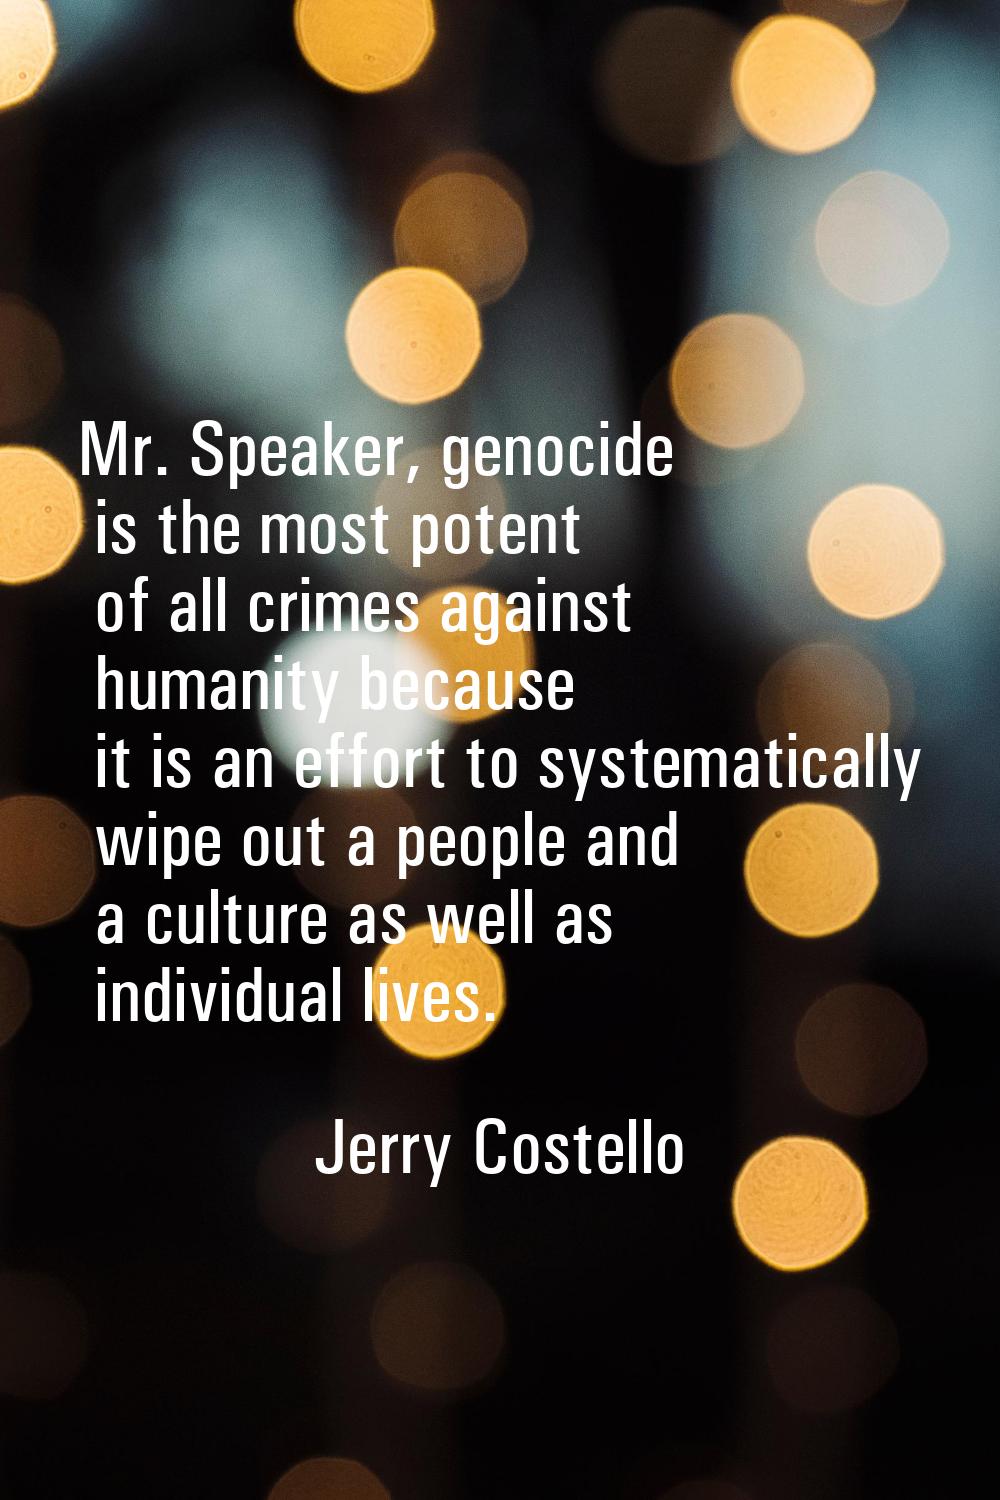 Mr. Speaker, genocide is the most potent of all crimes against humanity because it is an effort to 